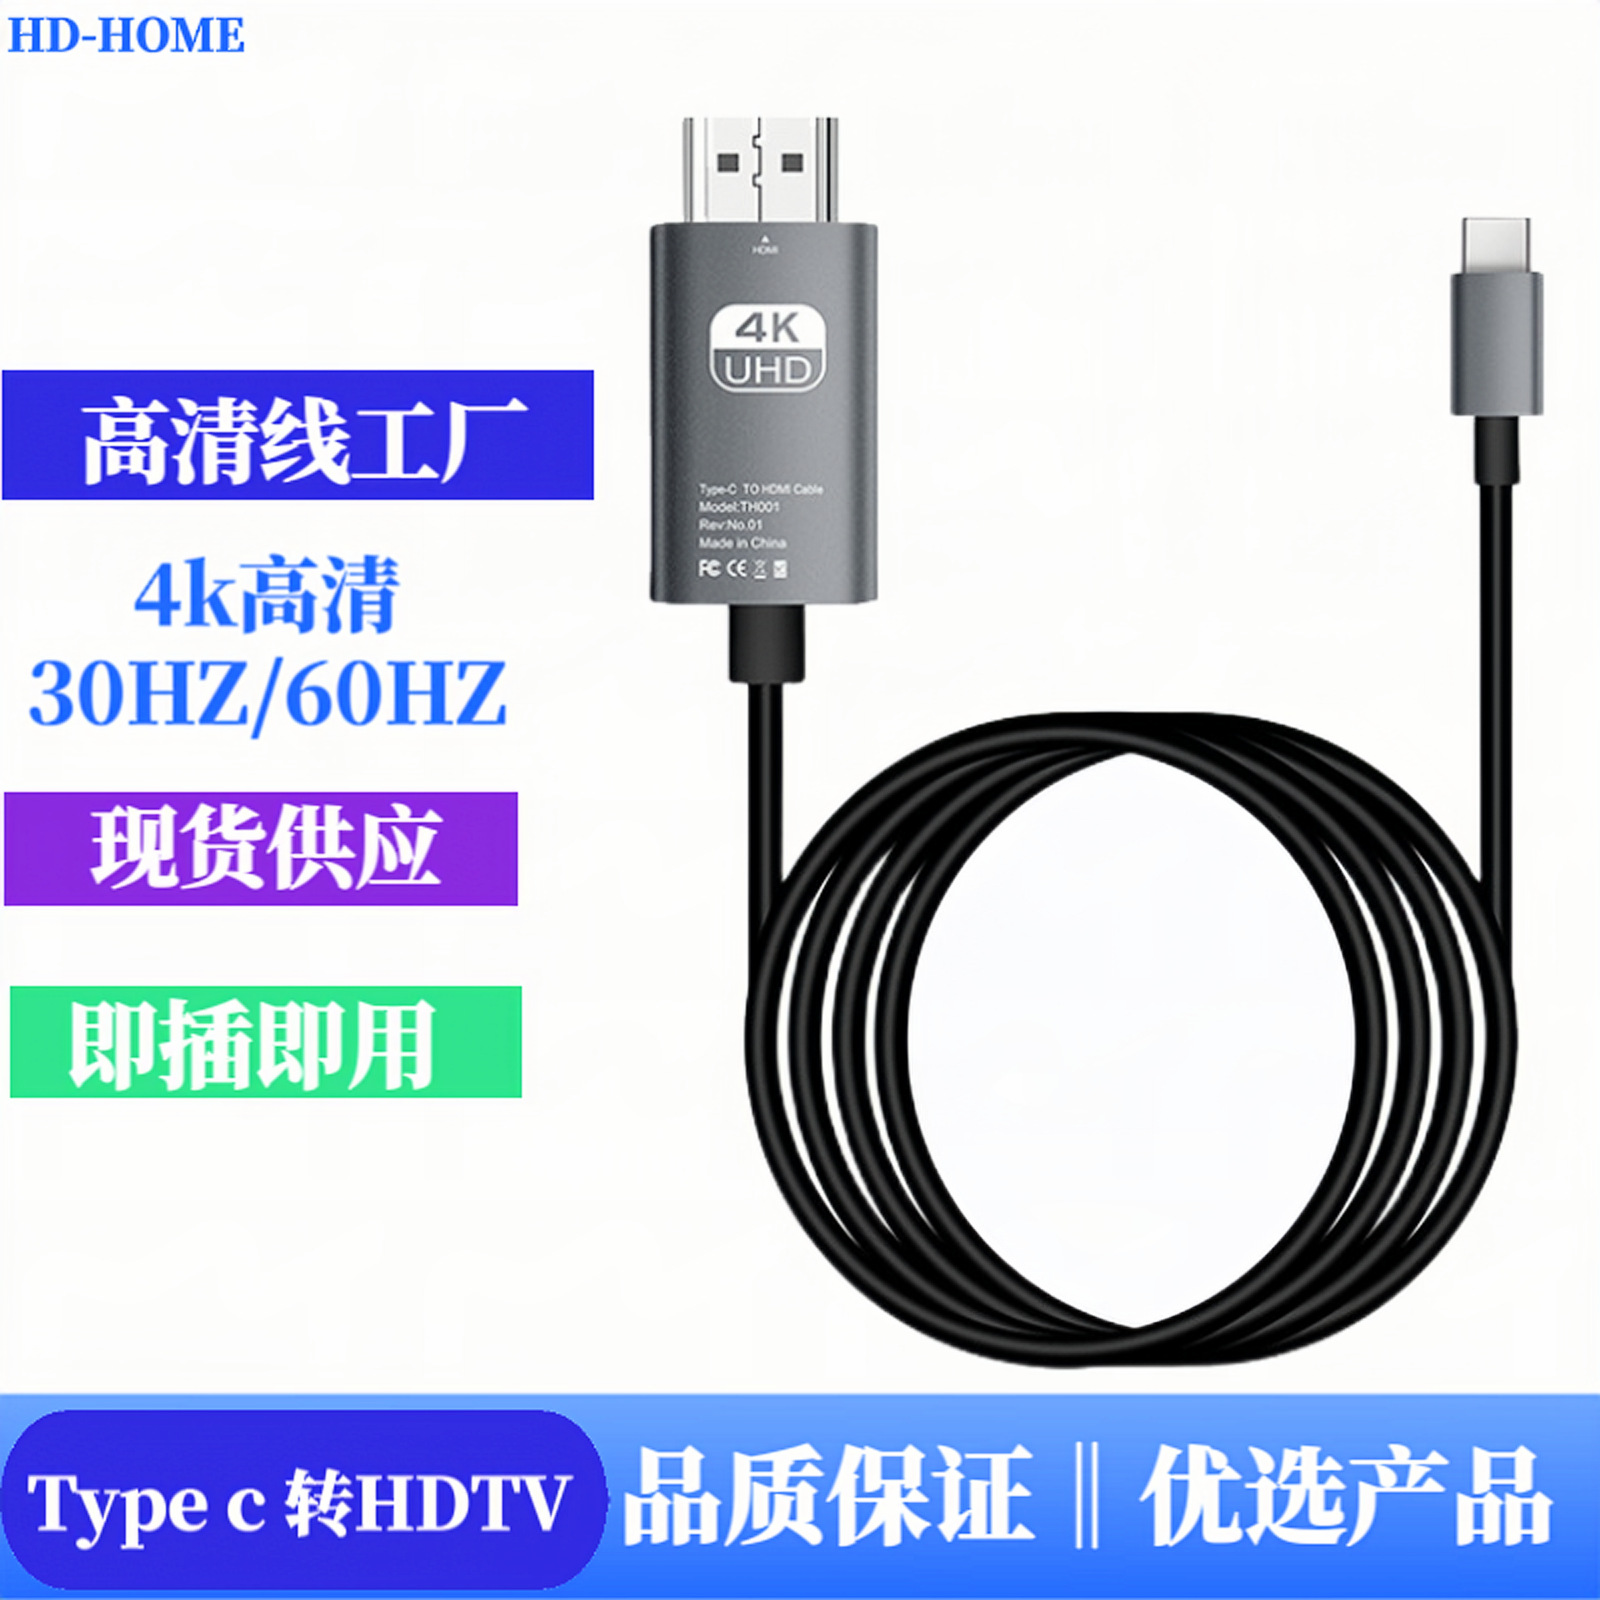 Mobile Phone Computer Same Screen HDMI Cable 4k60hz HD Projection Screen Adapter Cable Typec to HDMI Video Connector